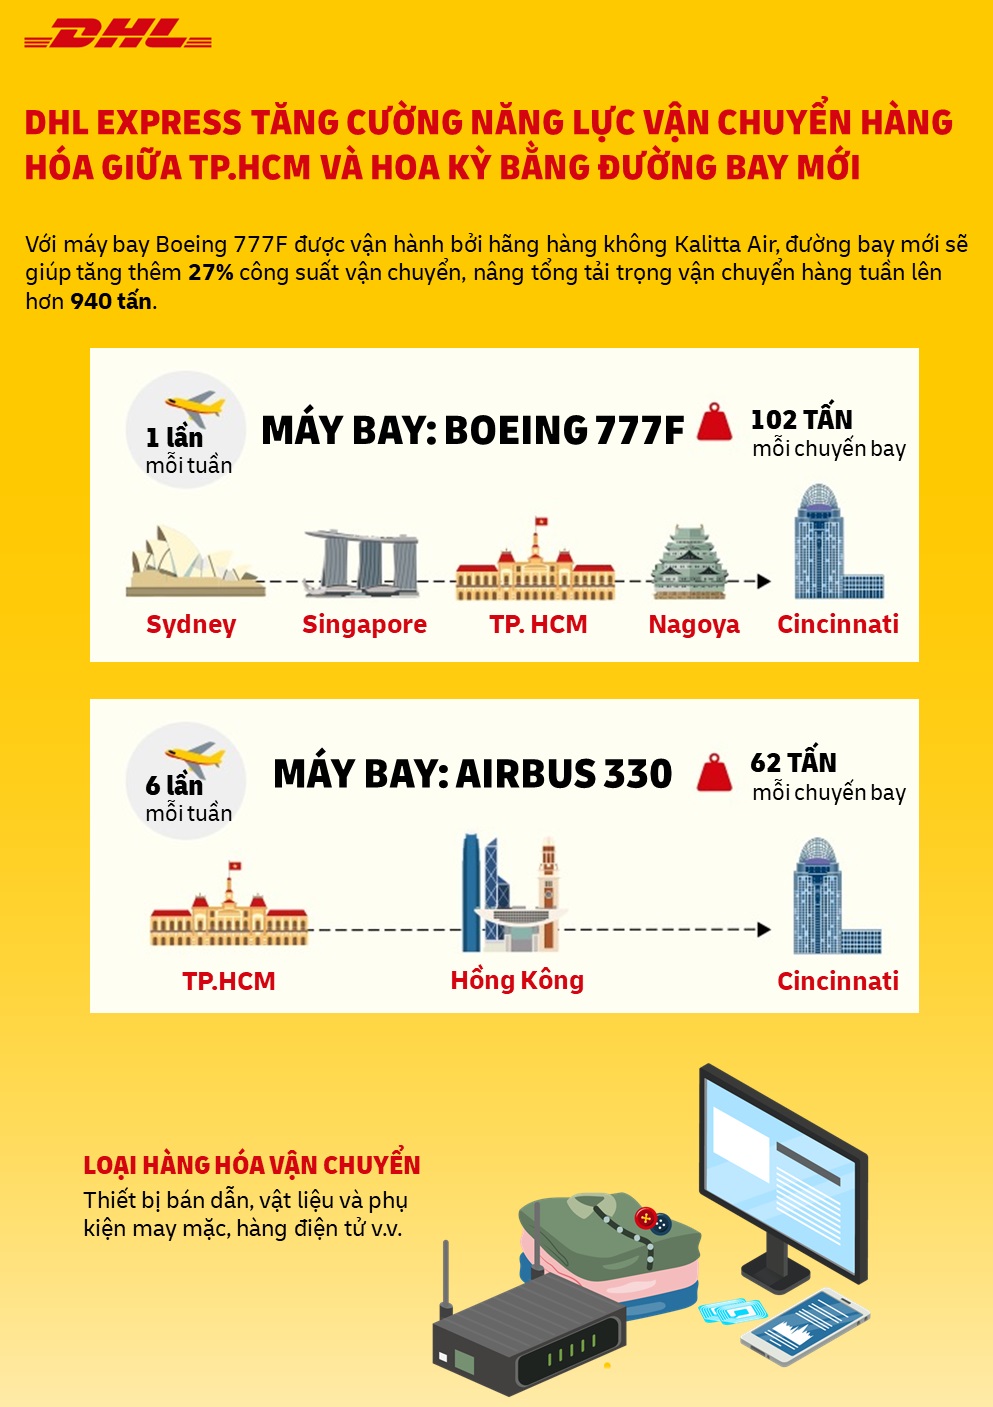 DHL-Express_-Infographic_new-capacity.jpg